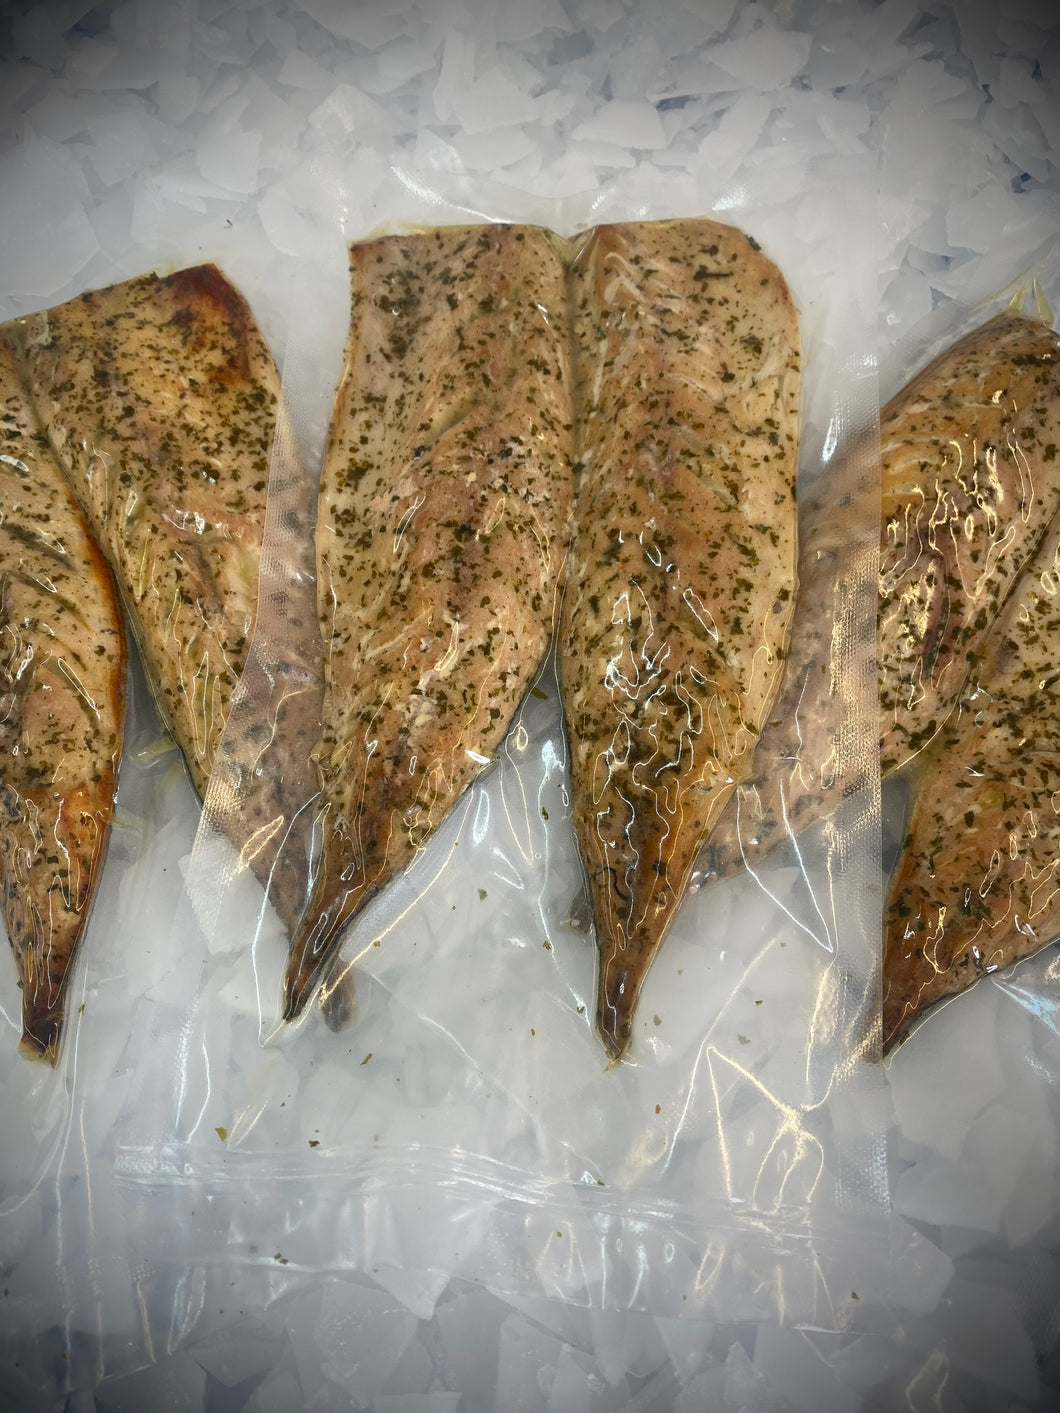 Lemon and Parsley Smoked Mackerel Fillets by Marisco Fish! Cornwall's finest seafood.